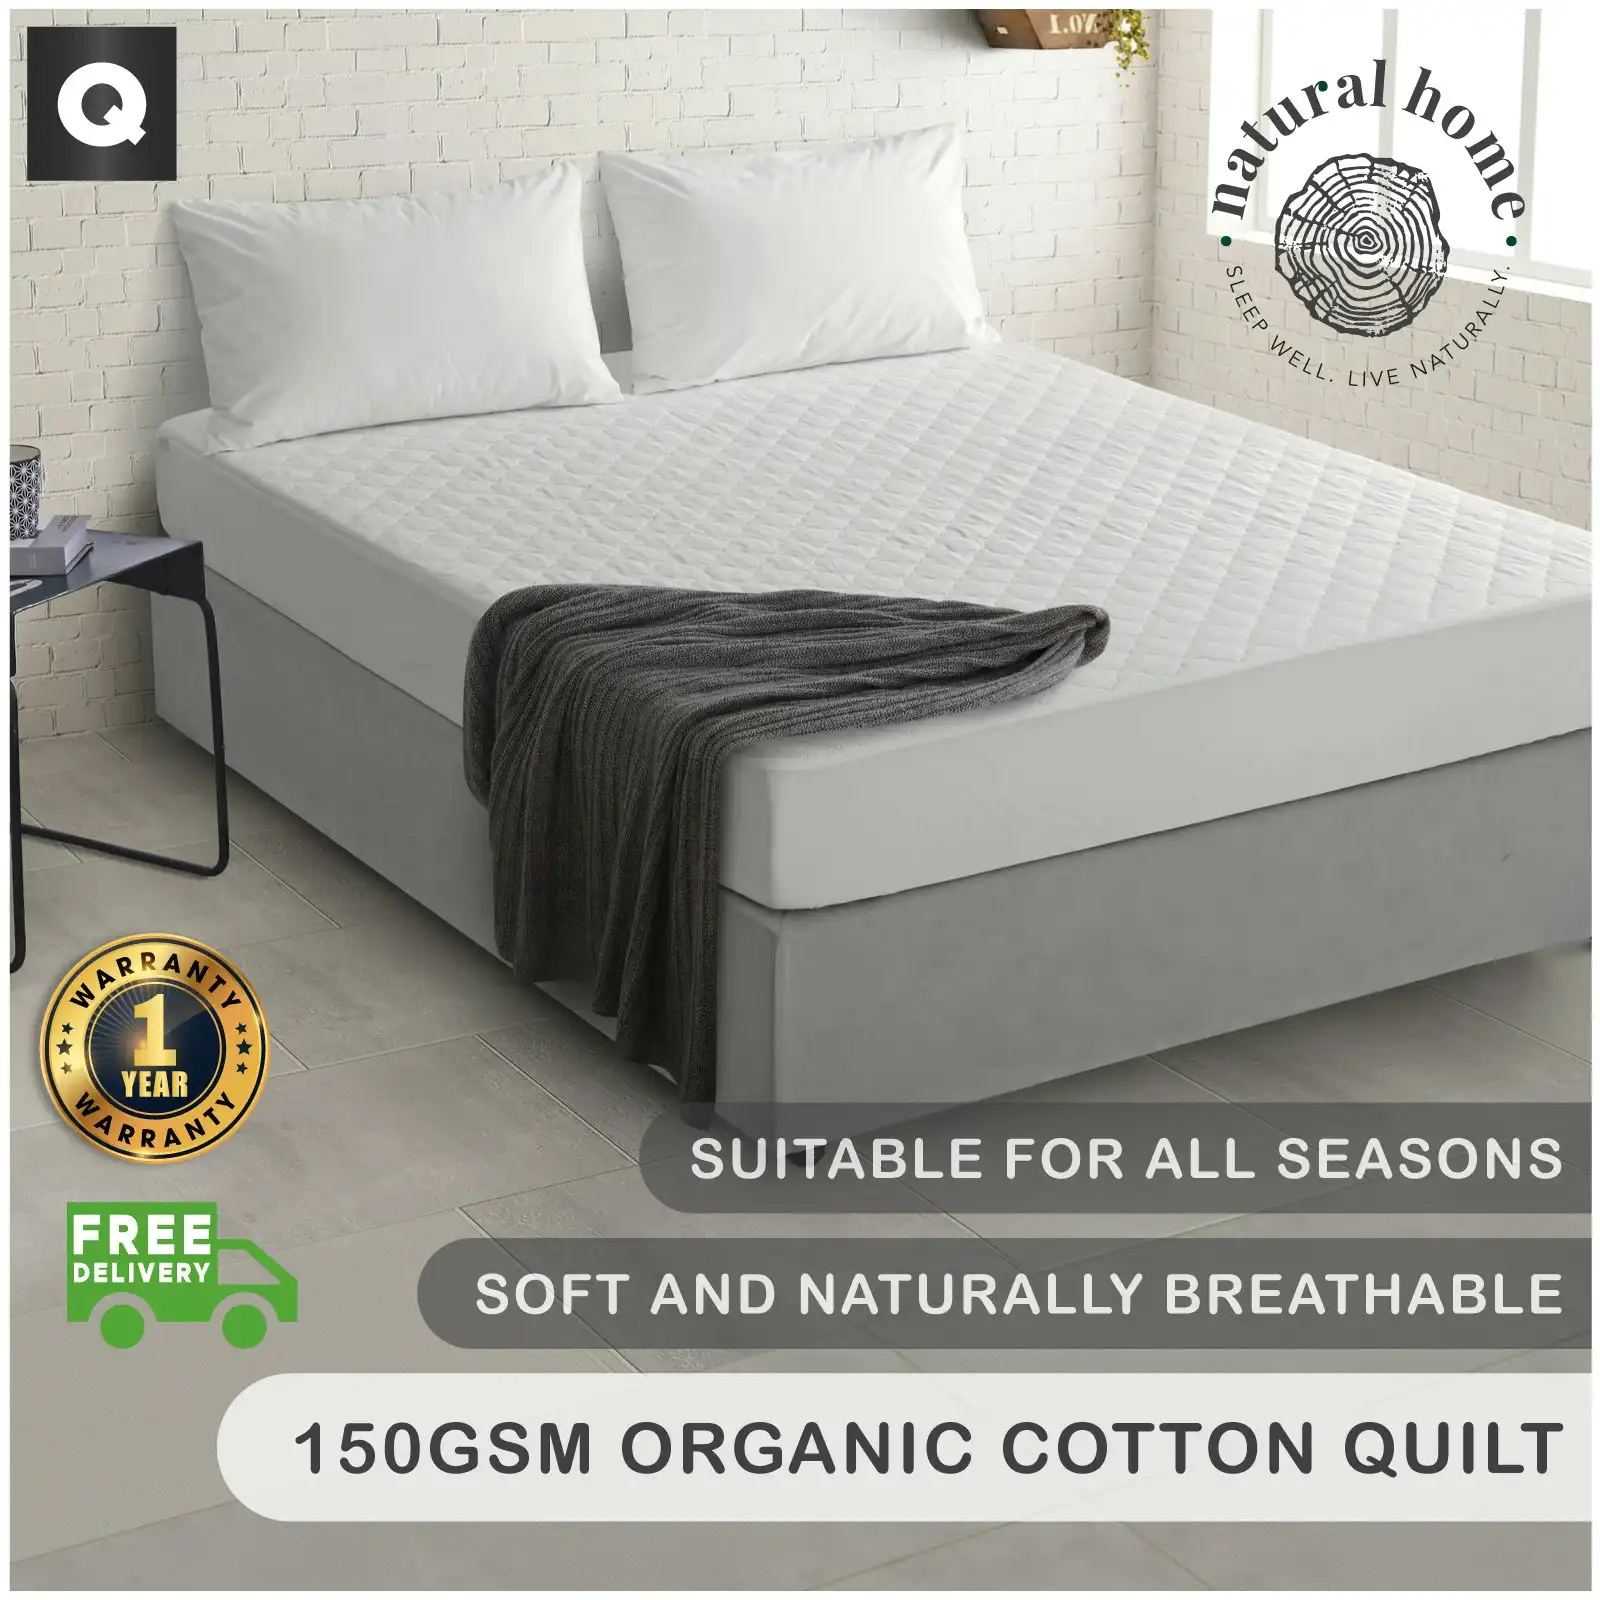 Natural Home Organic Cotton Quilted Mattress Protector White Queen Bed